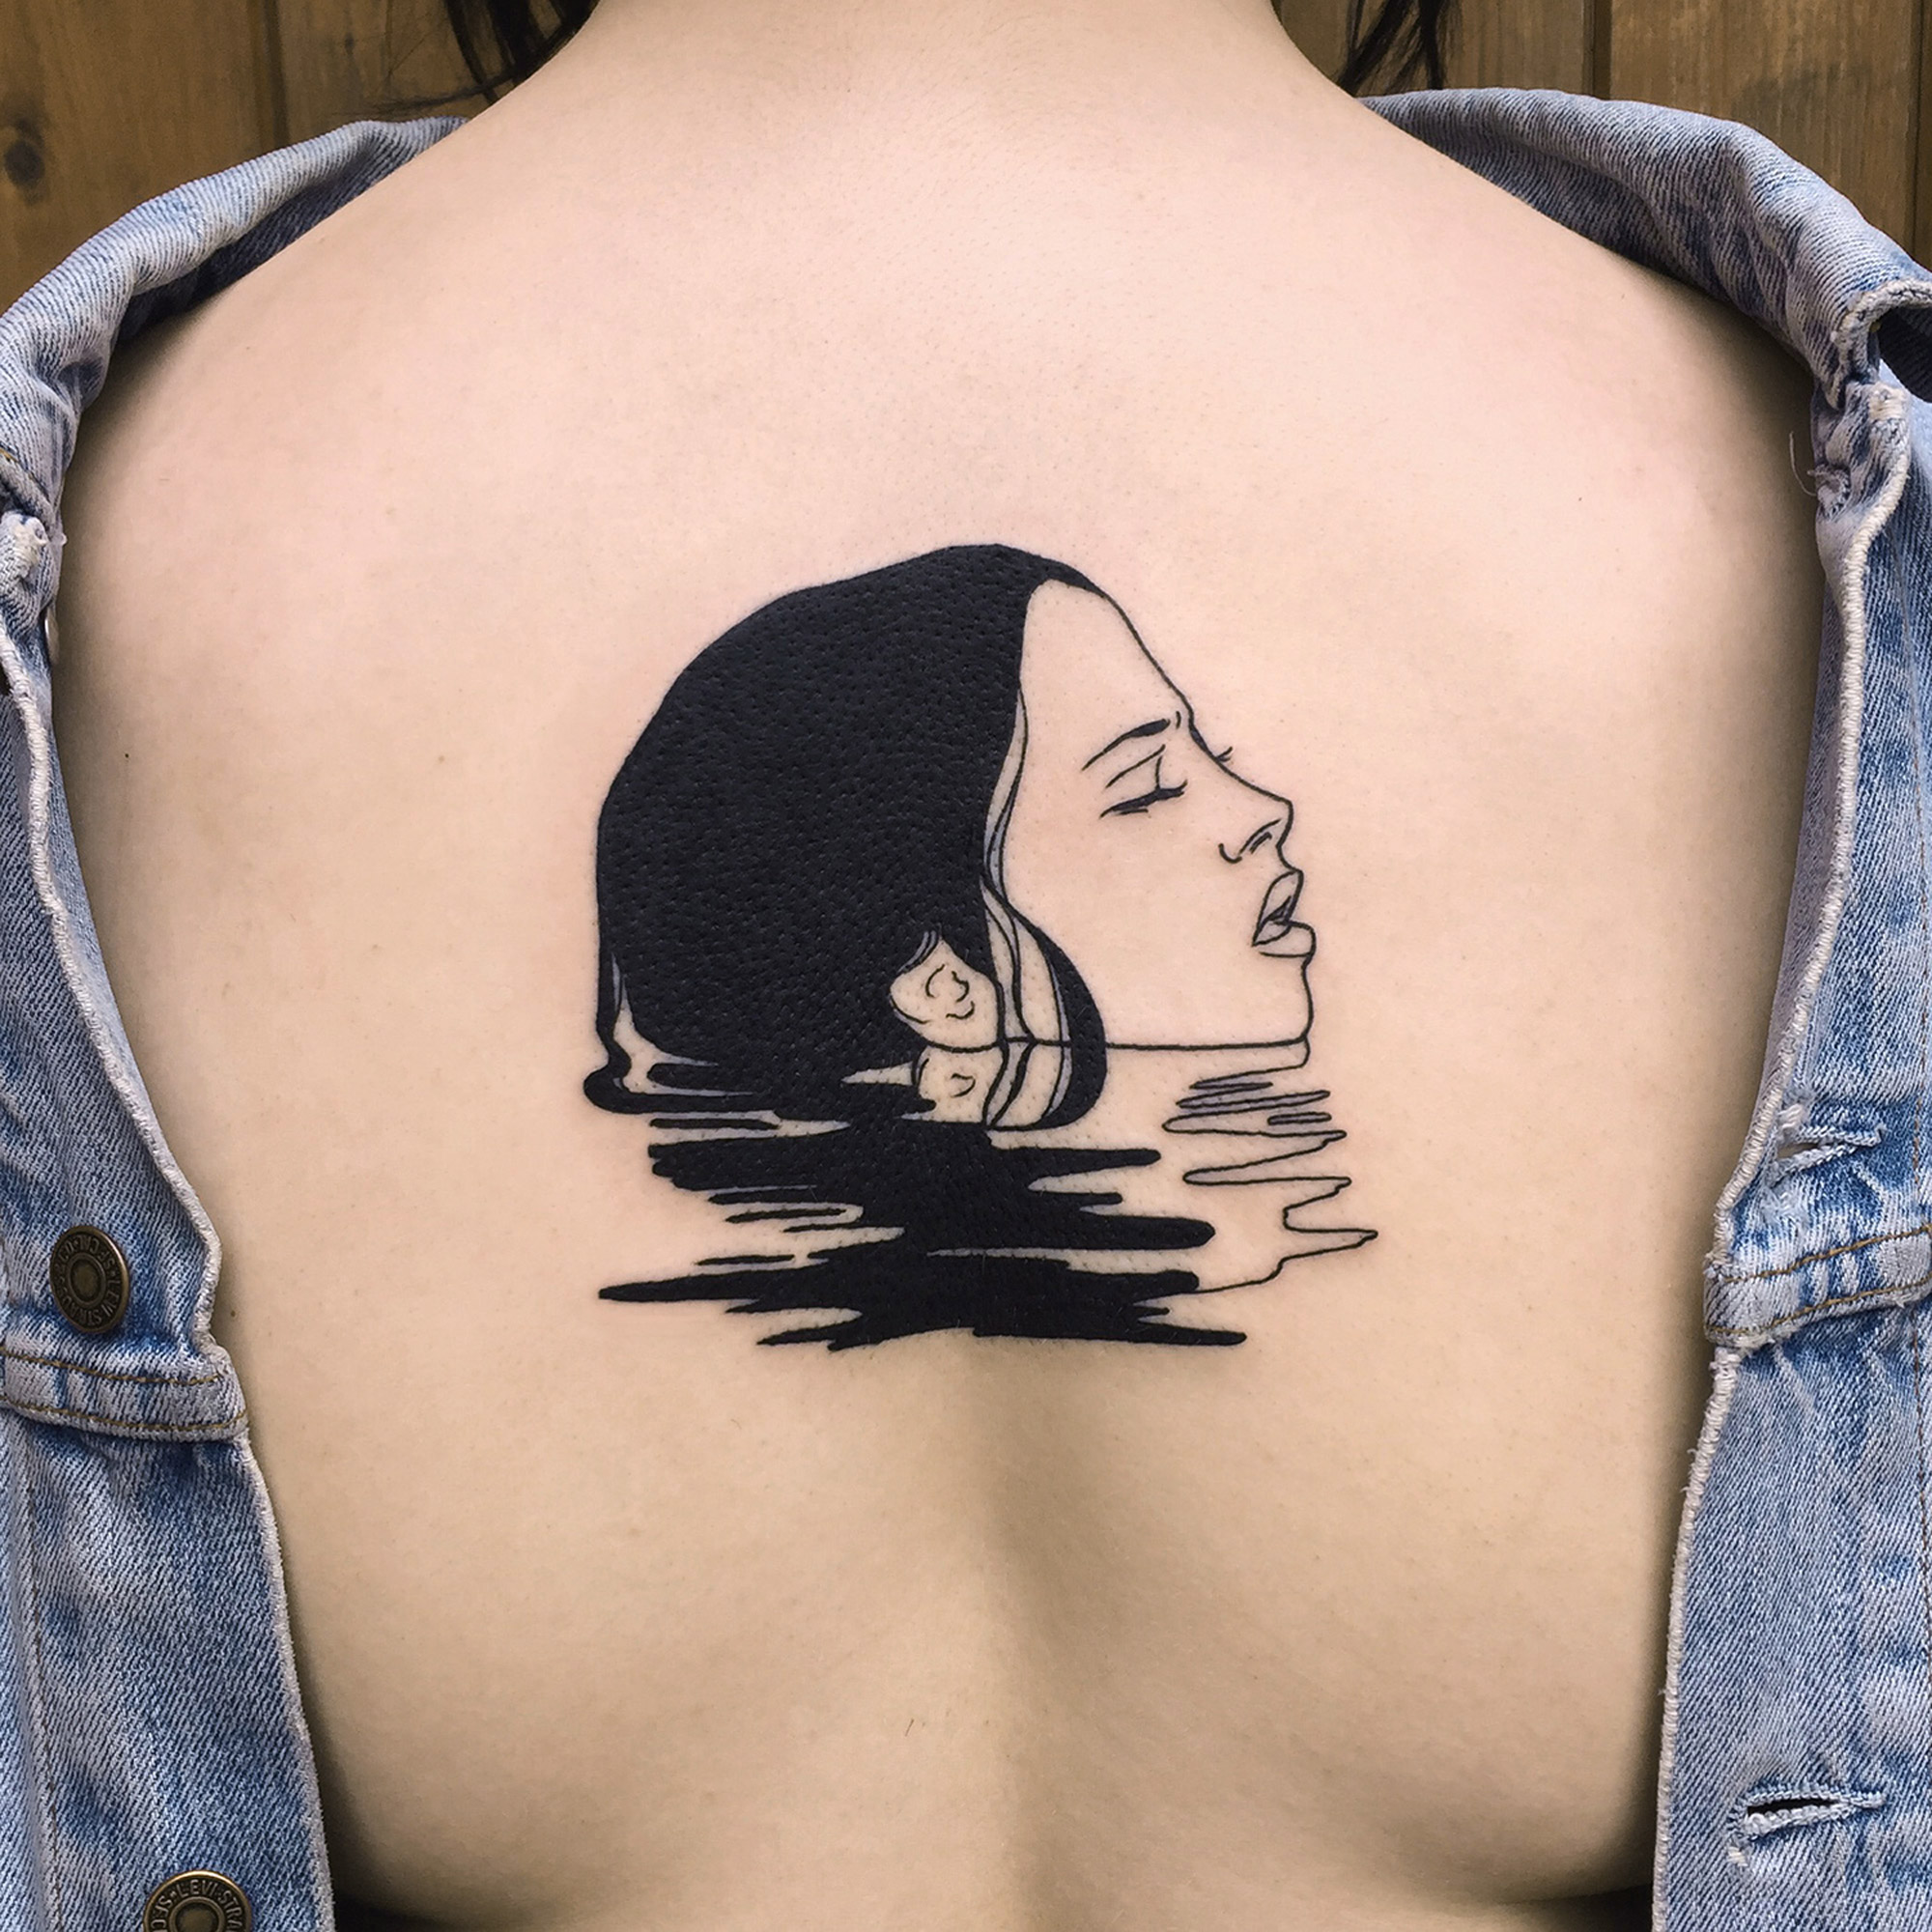 Silly Jane, Tattoo - reflection of woman's head in water